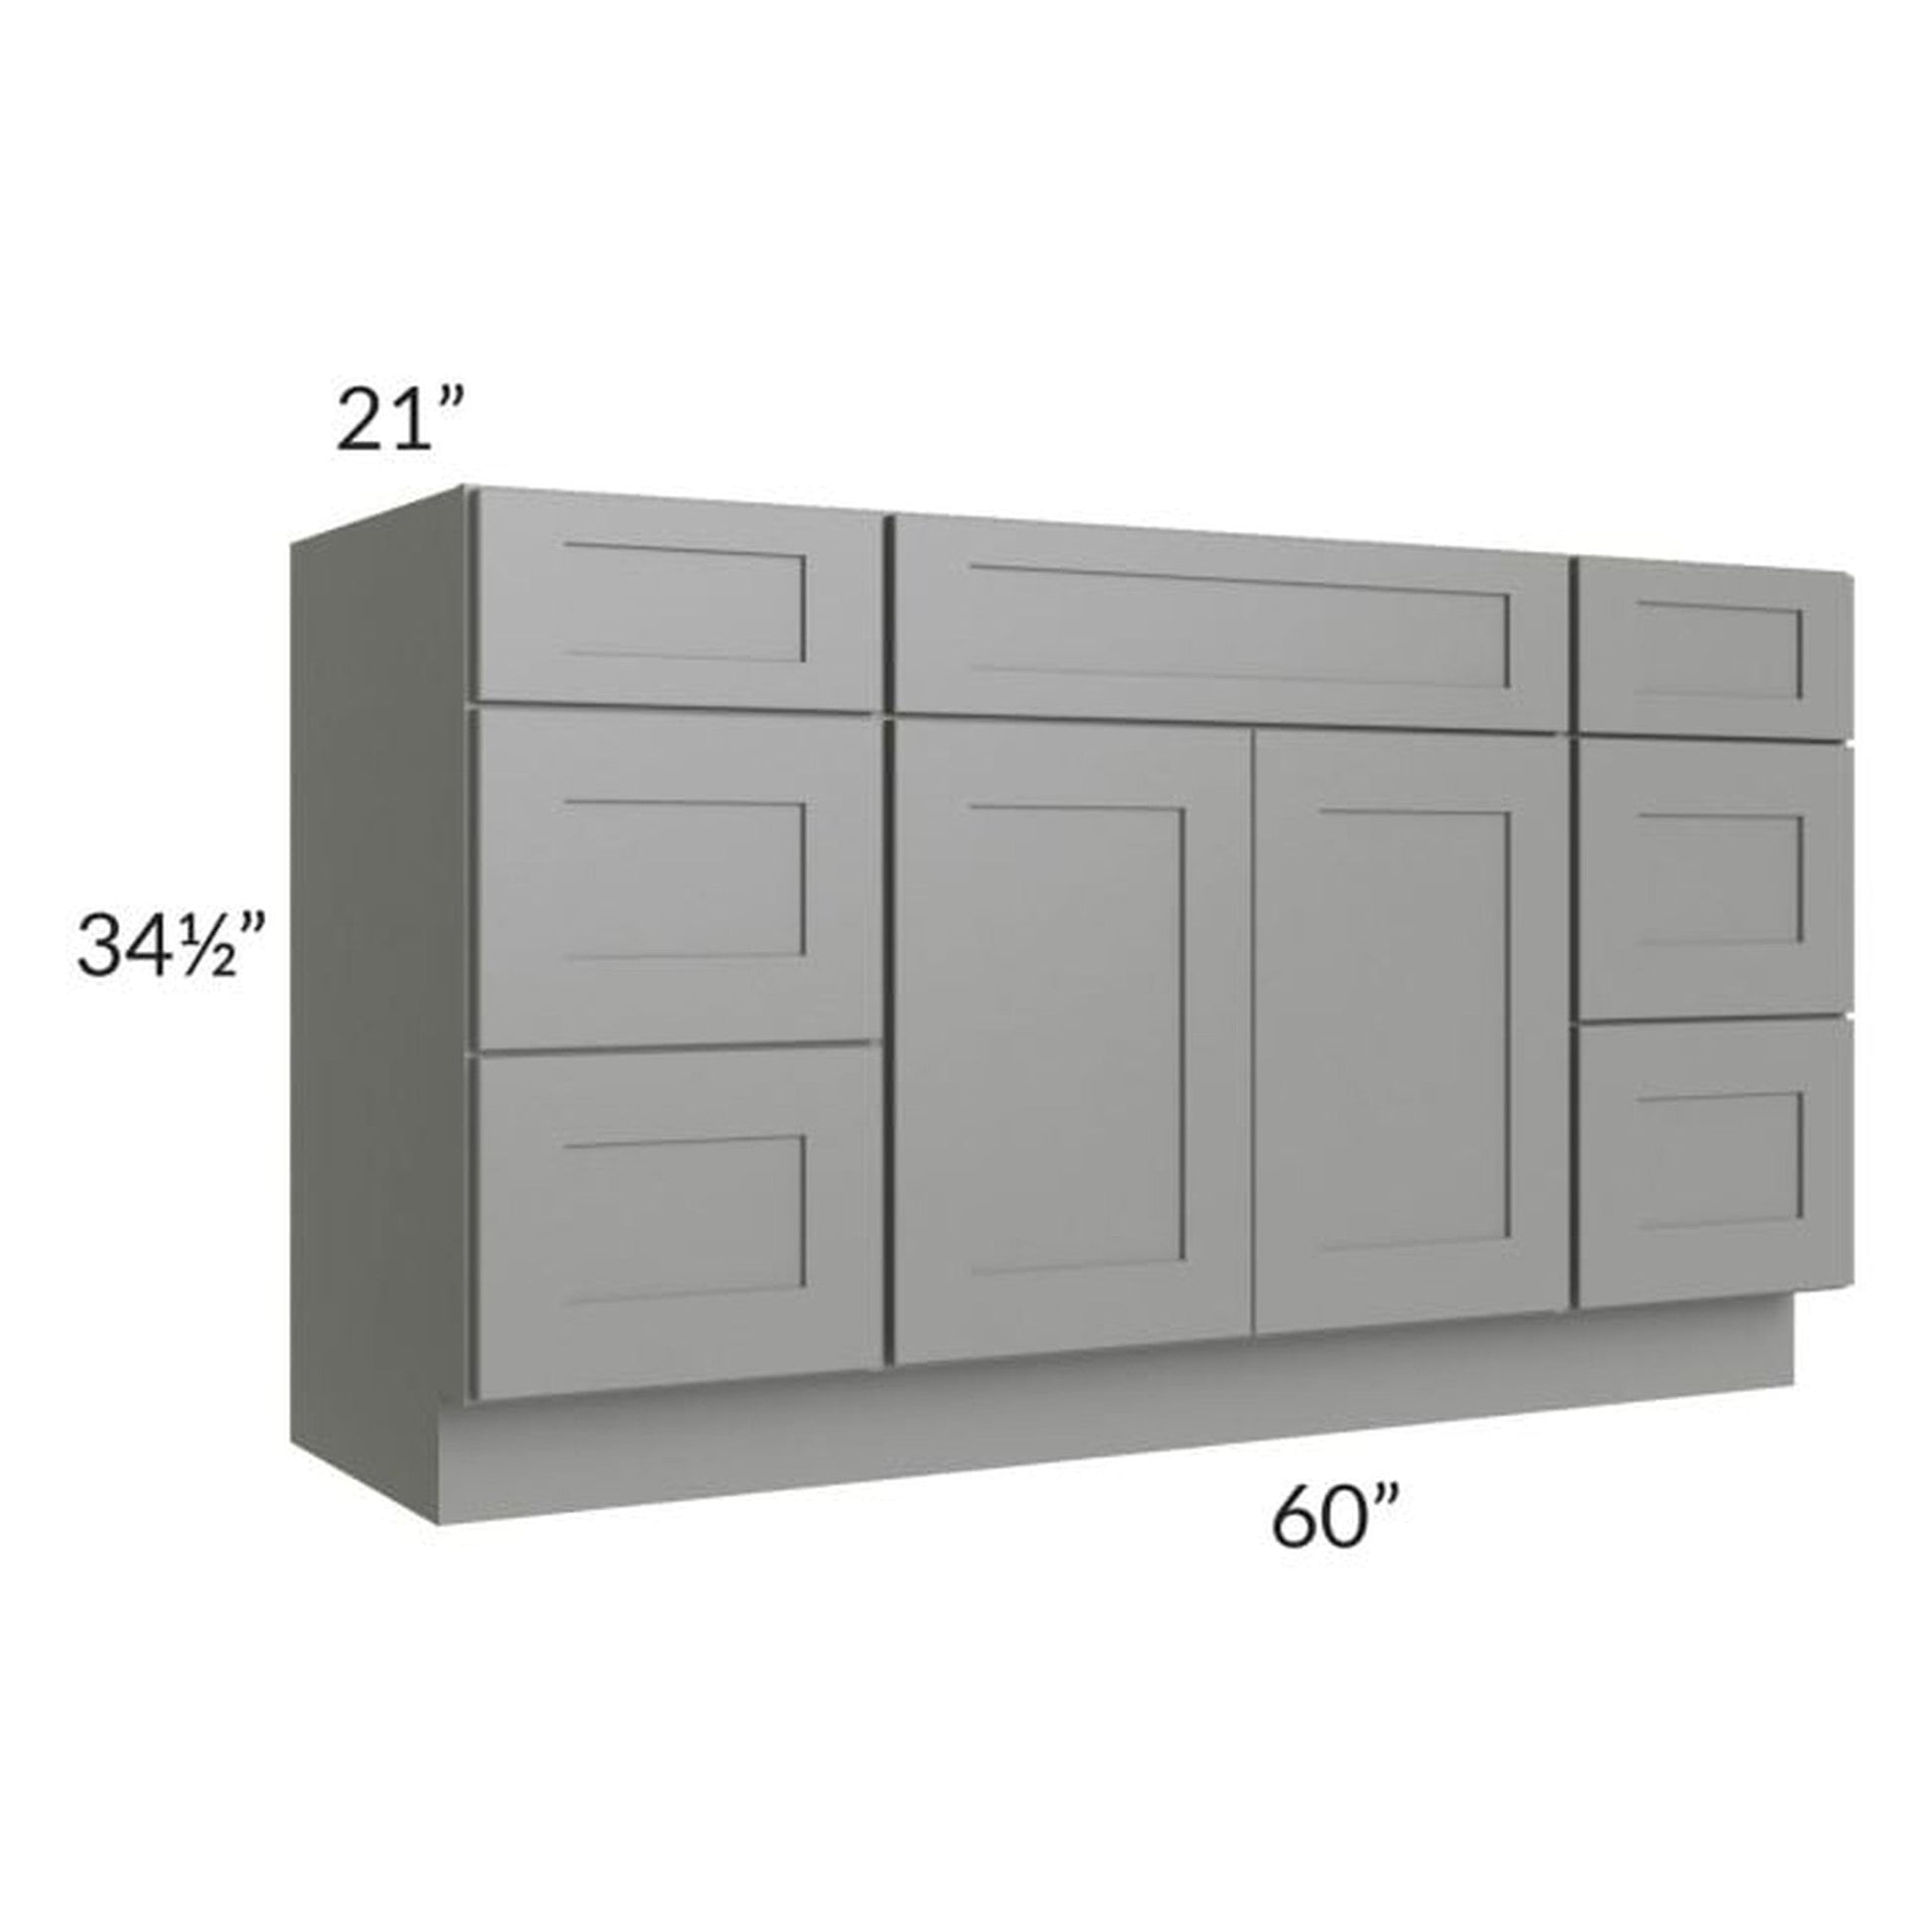 RTA Shale Grey Shaker 60" Vanity Sink Base Cabinet with Drawers PS-V6021DD with 2 Decorative End Panels